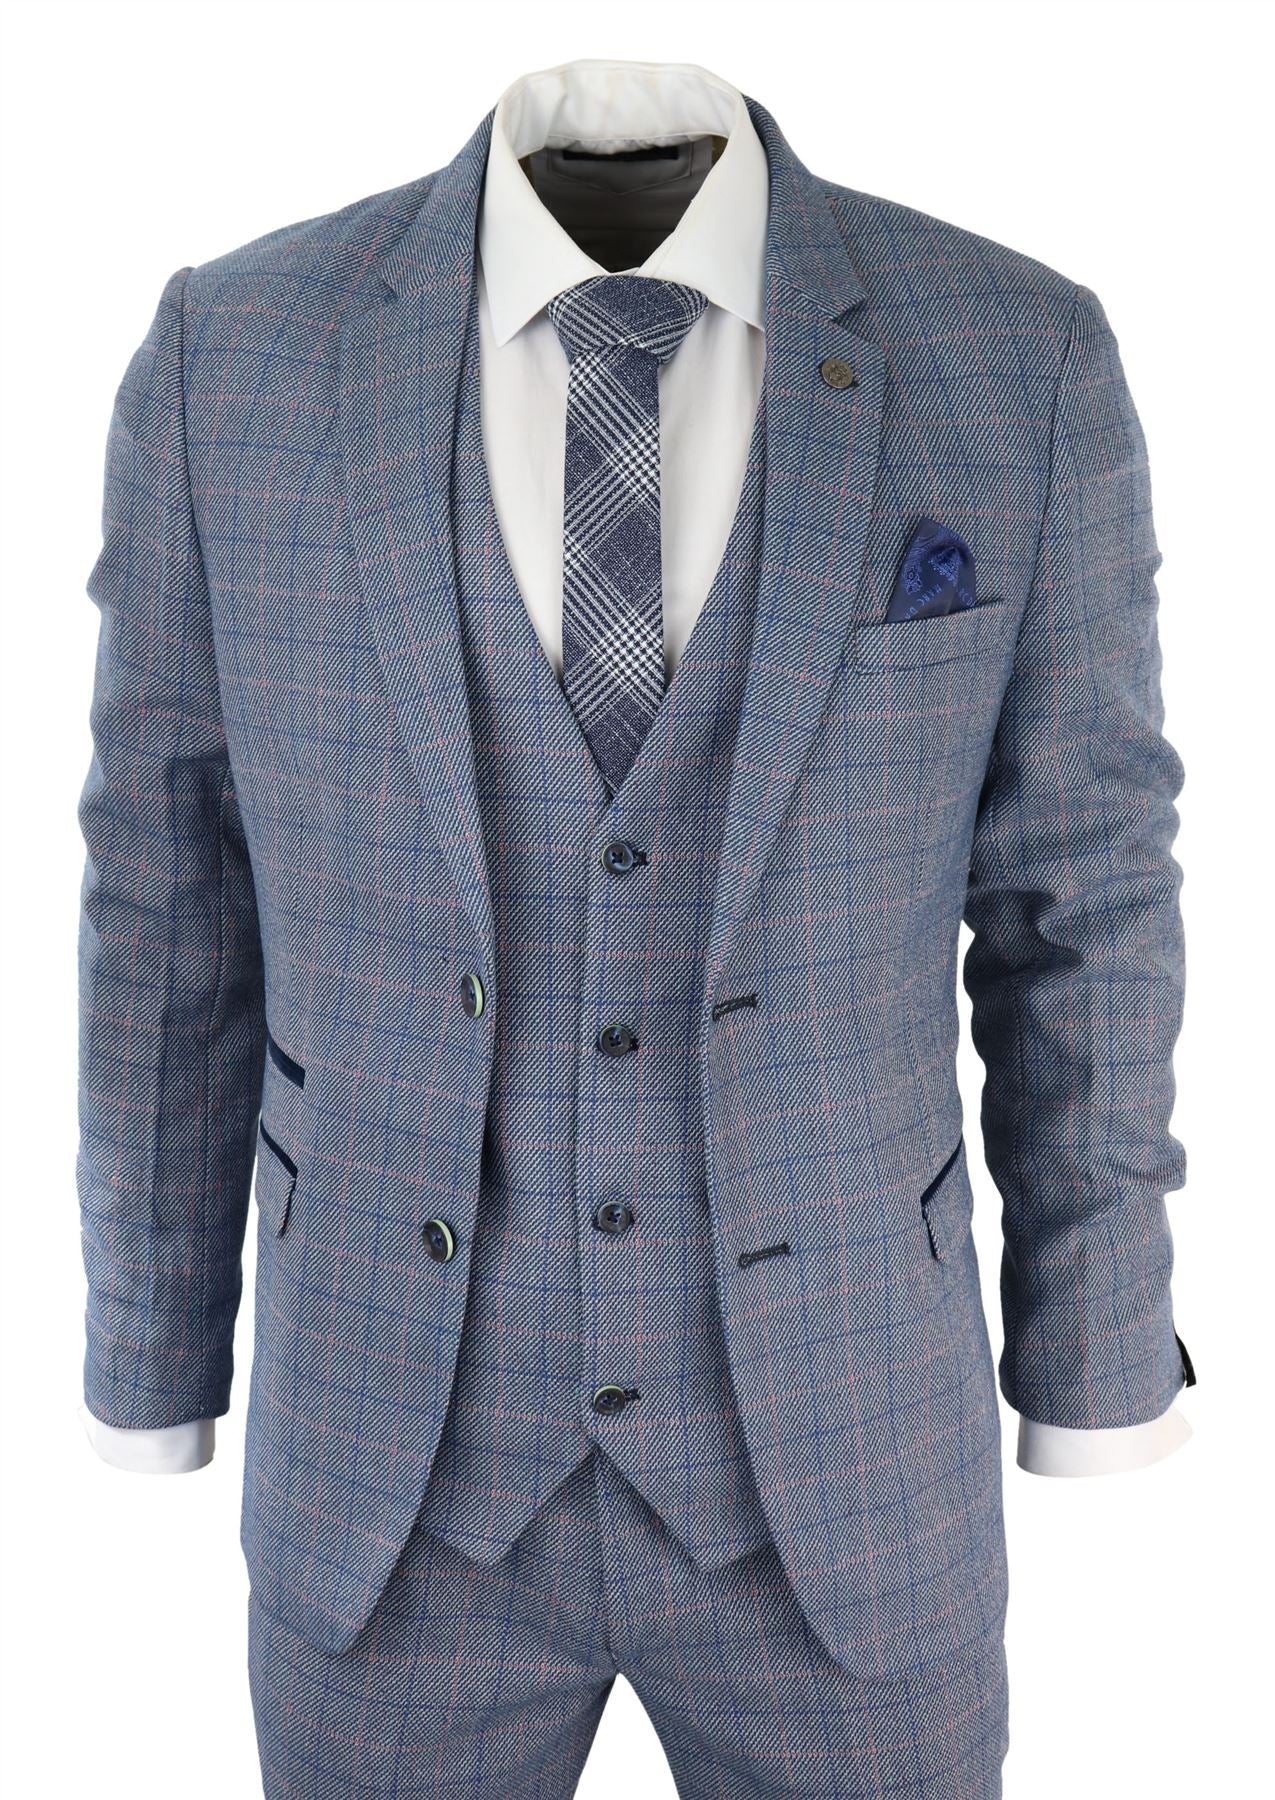 Mens 3 Piece Suit Sky Blue Check Wool Feel Marc Darcy Tailored Fit ...